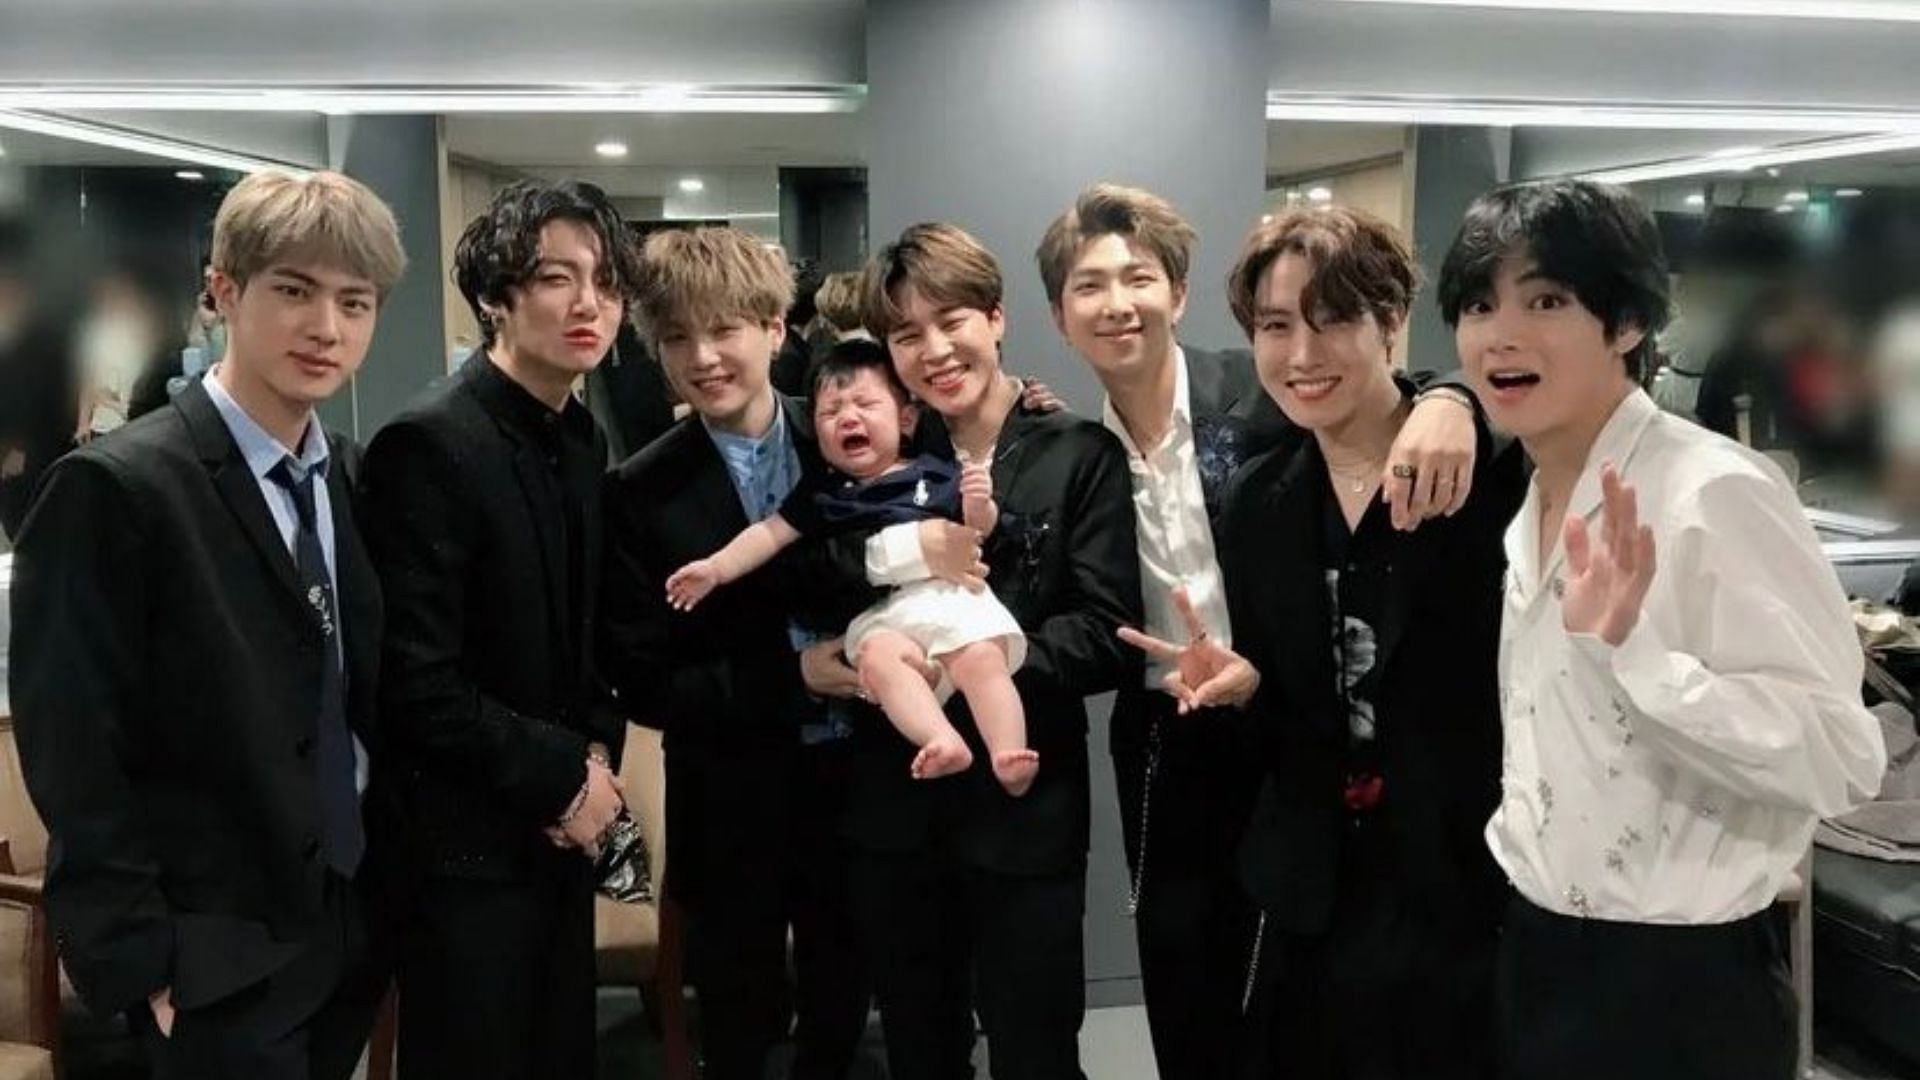 BTS members pose with their manager